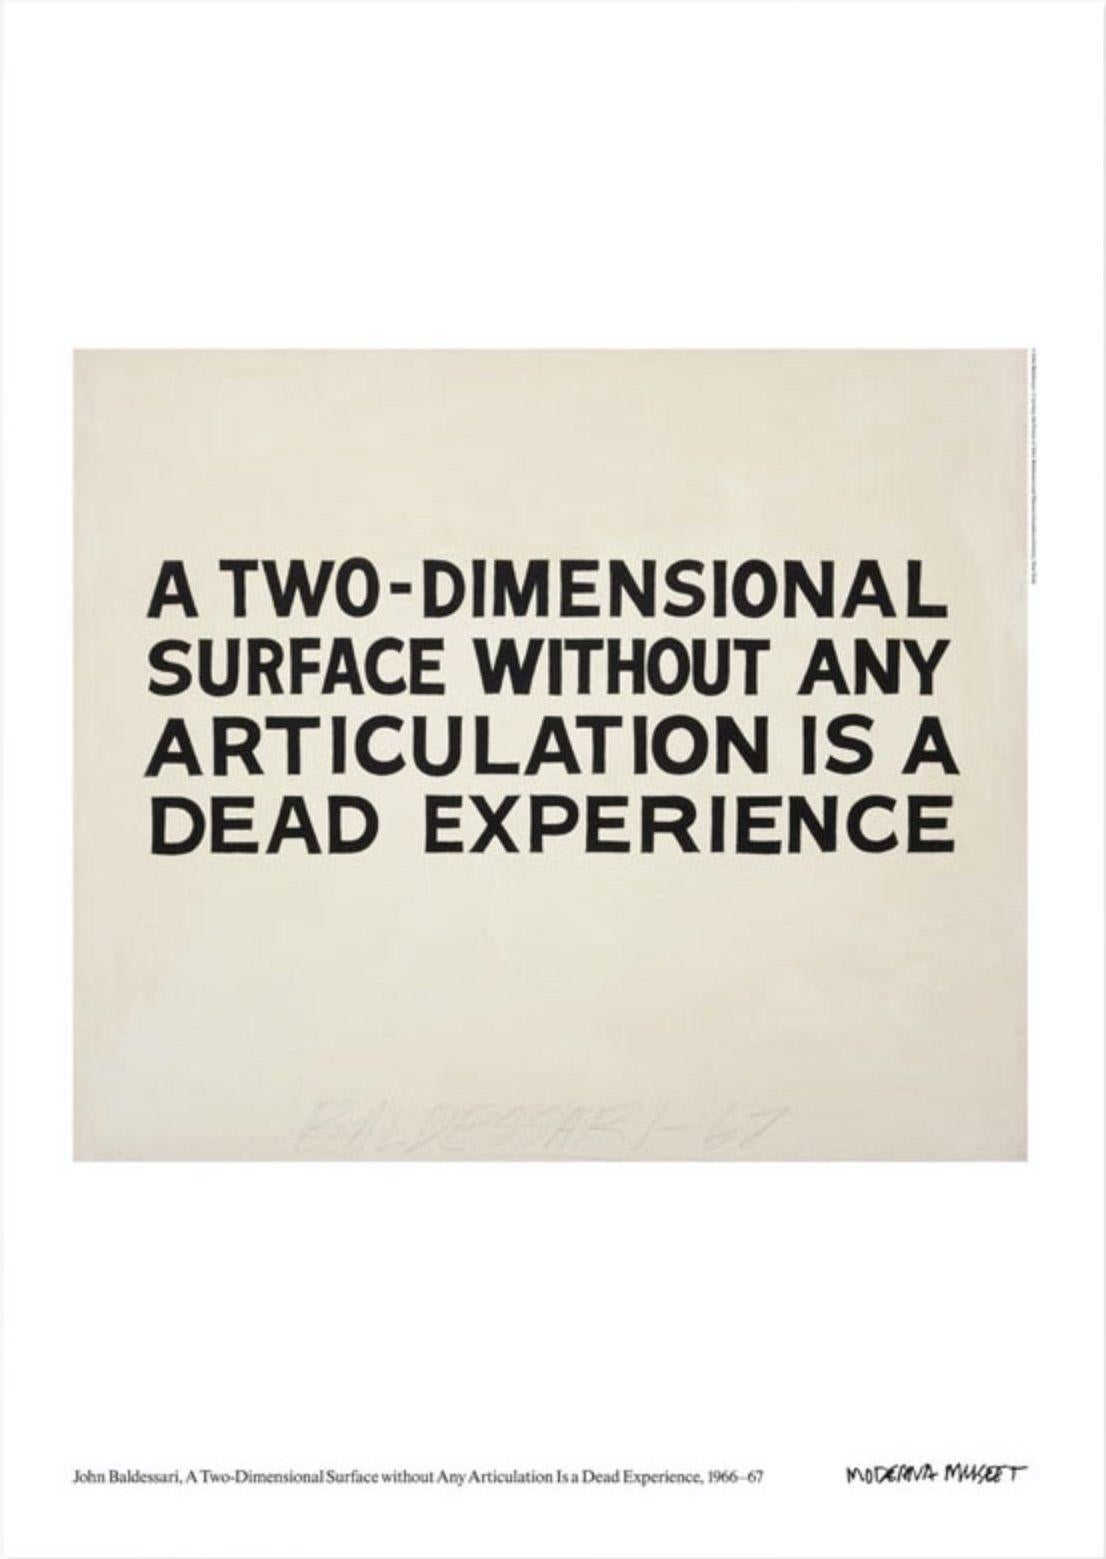 'A two-dimensional surface without any articulation is a dead experience' poster - Print by John Baldessari